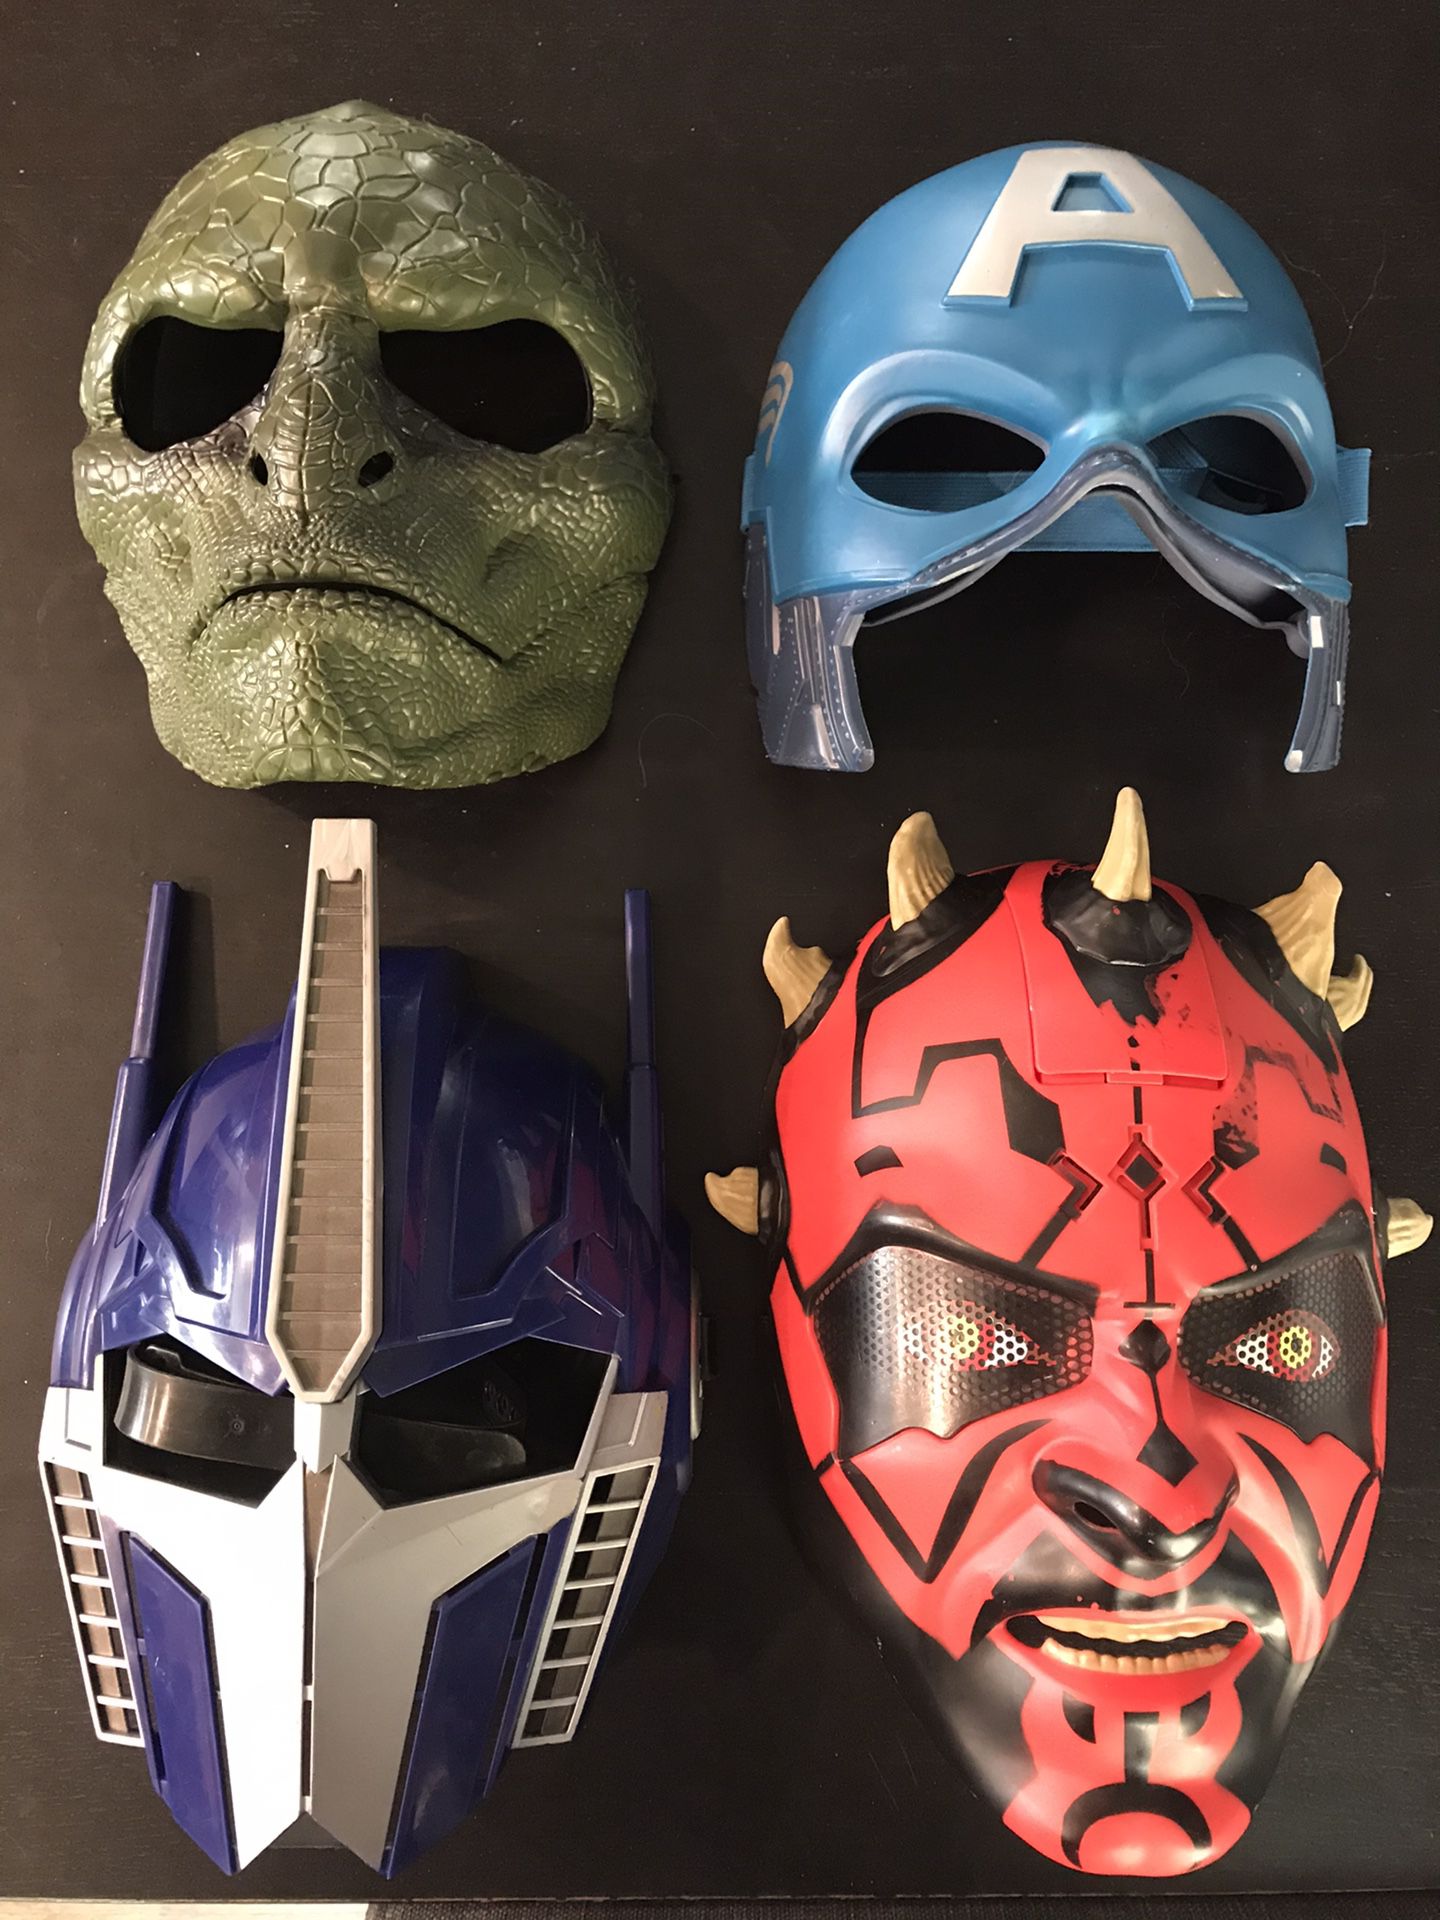 Kids Toy Masks - $20 for the lot